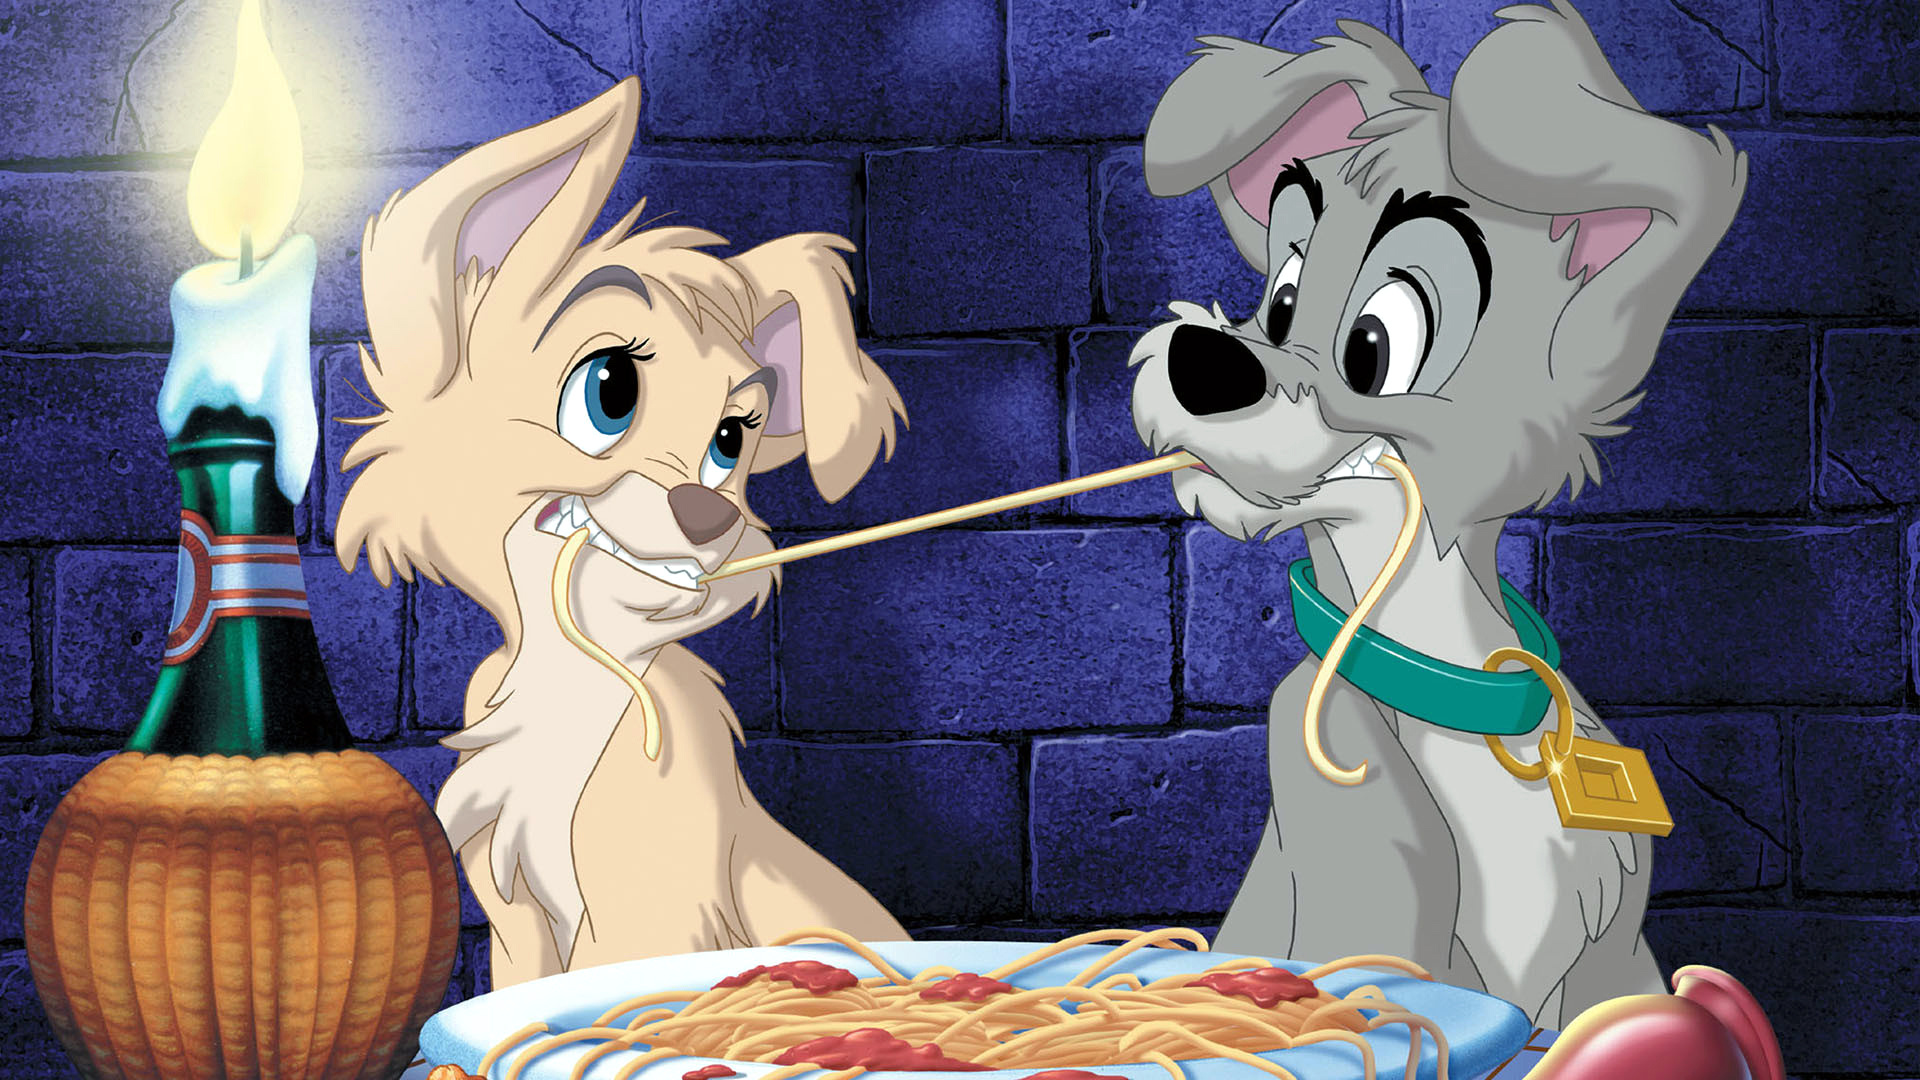 Lady and the Tramp, Scamp wallpapers, Disney's mischievous pup, Animated adventure, 1920x1080 Full HD Desktop